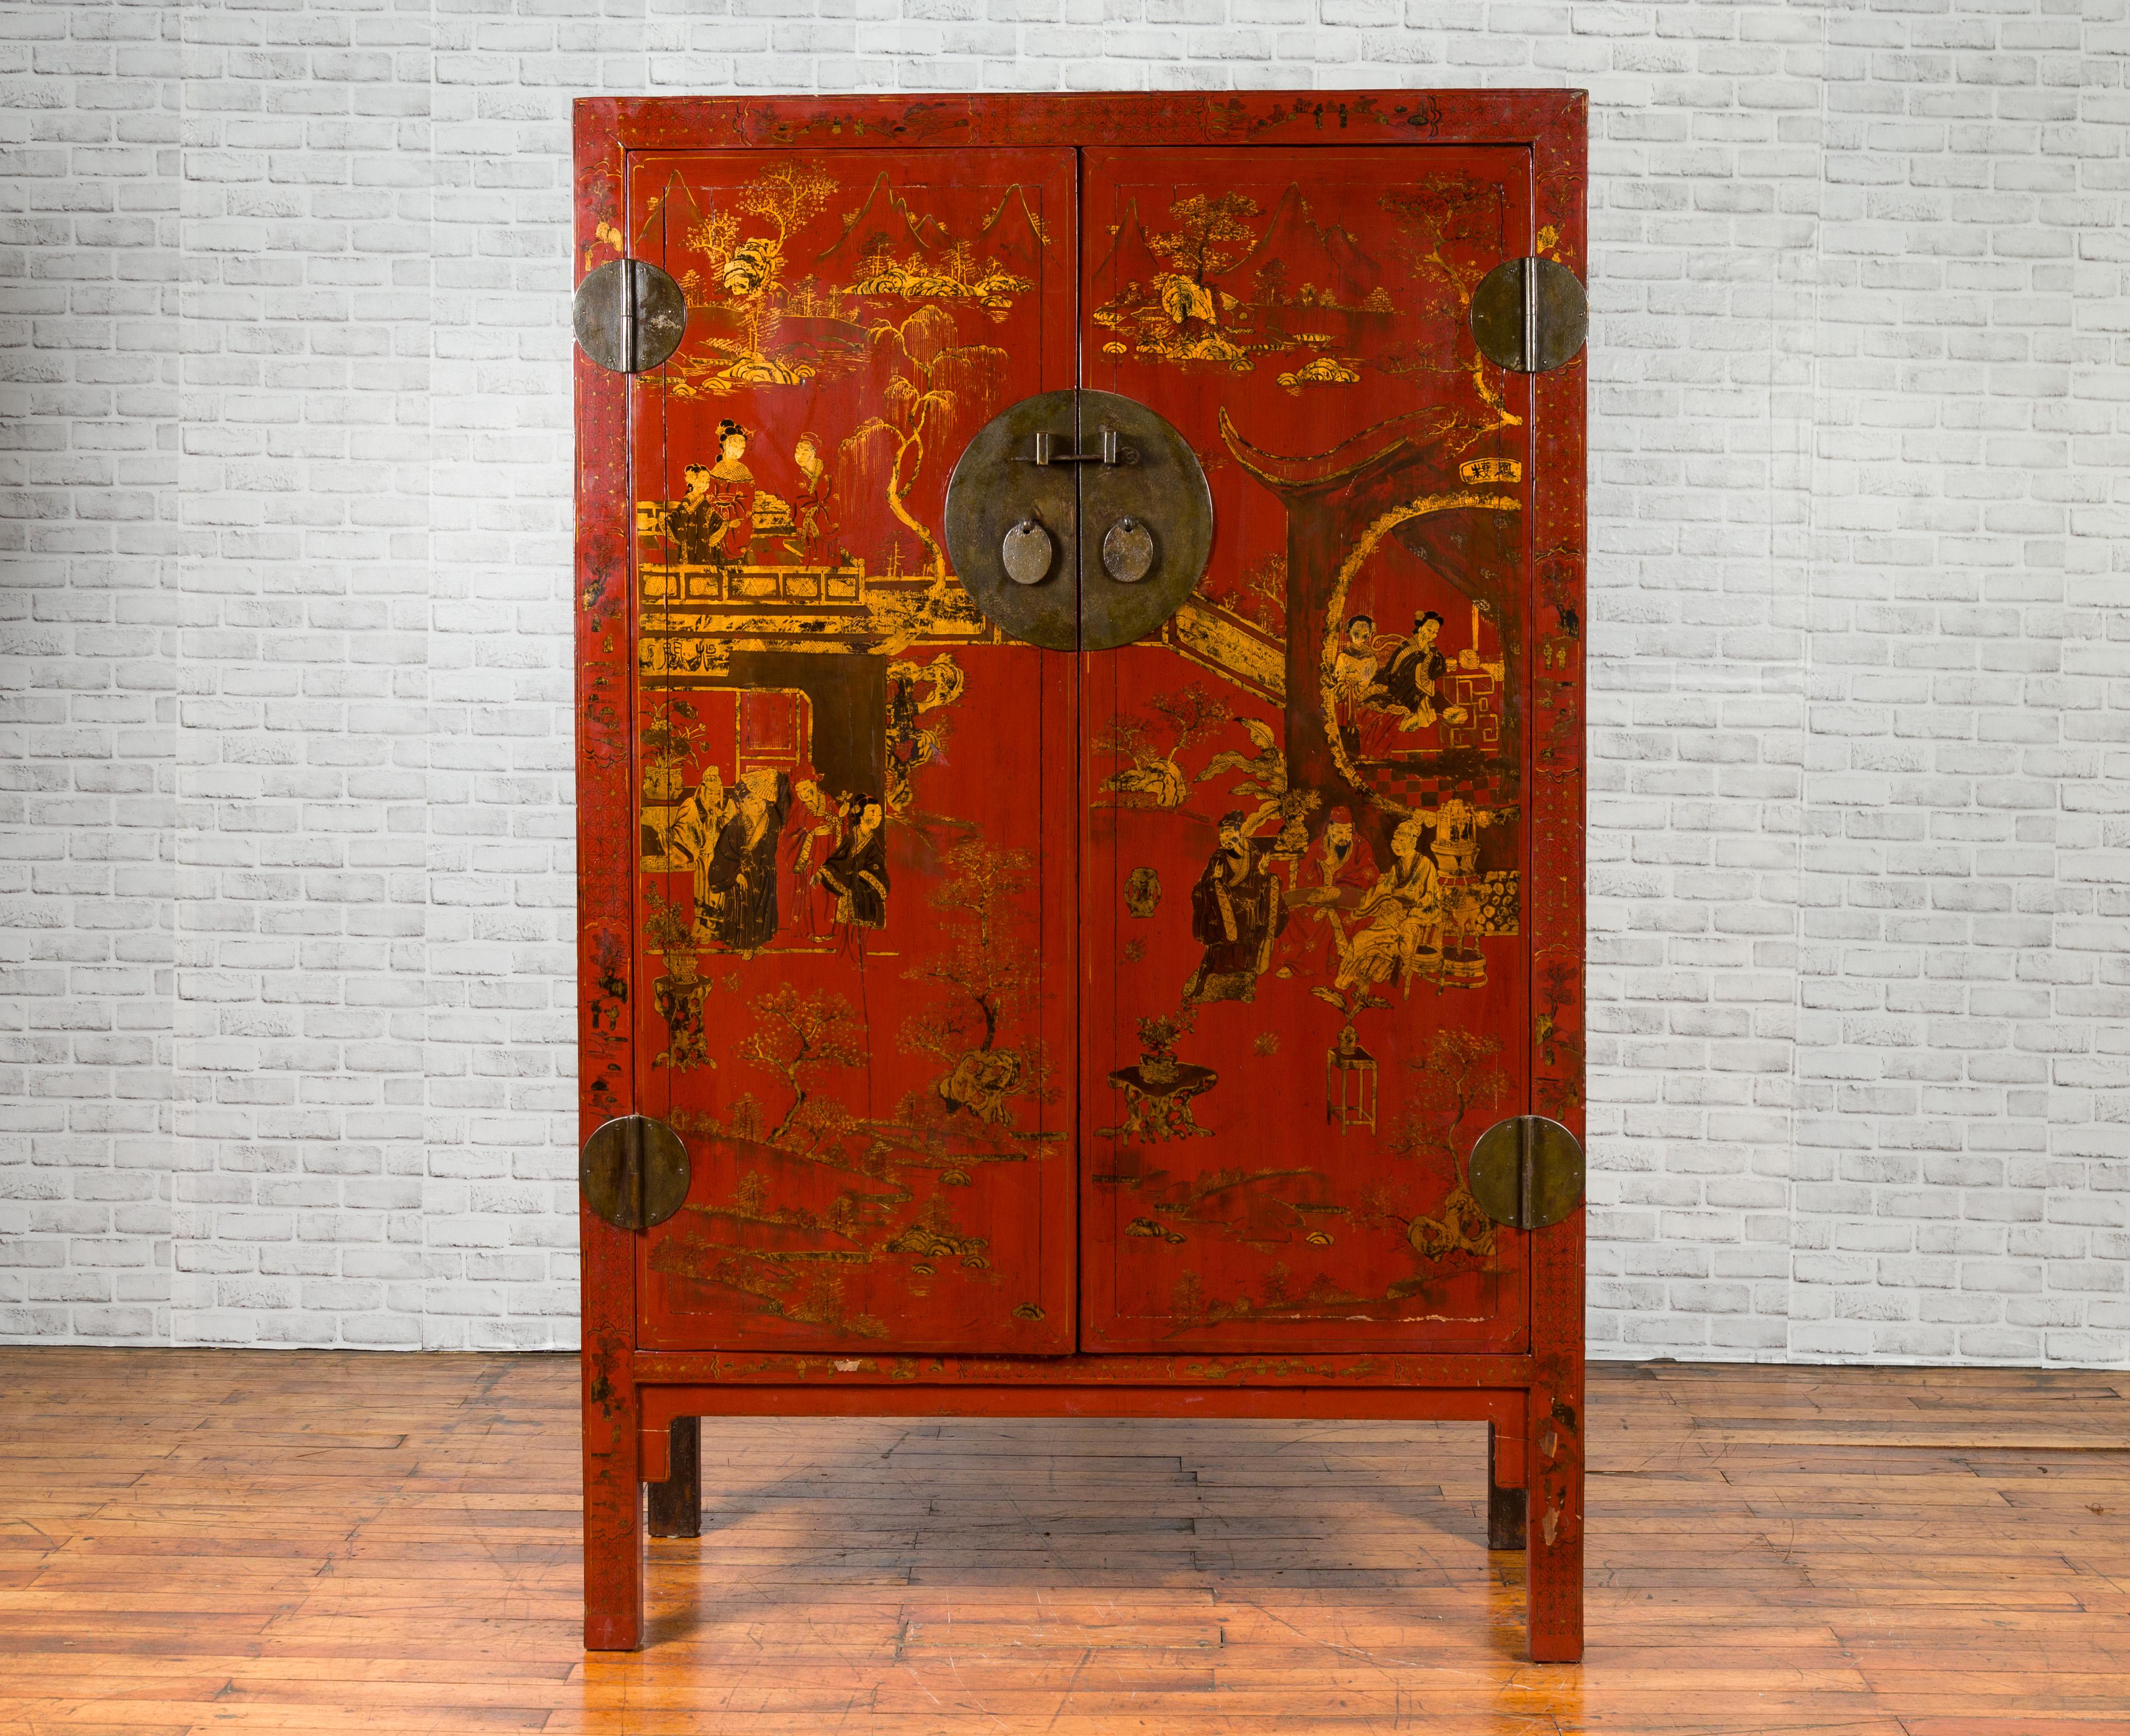 A Chinese Qing dynasty period red lacquered cabinet from the 19th century, with hand painted gilt chinoiserie decor. Created in China during the Qing dynasty, this cabinet is varnished with a red lacquer. The façade showcases two doors adorned with